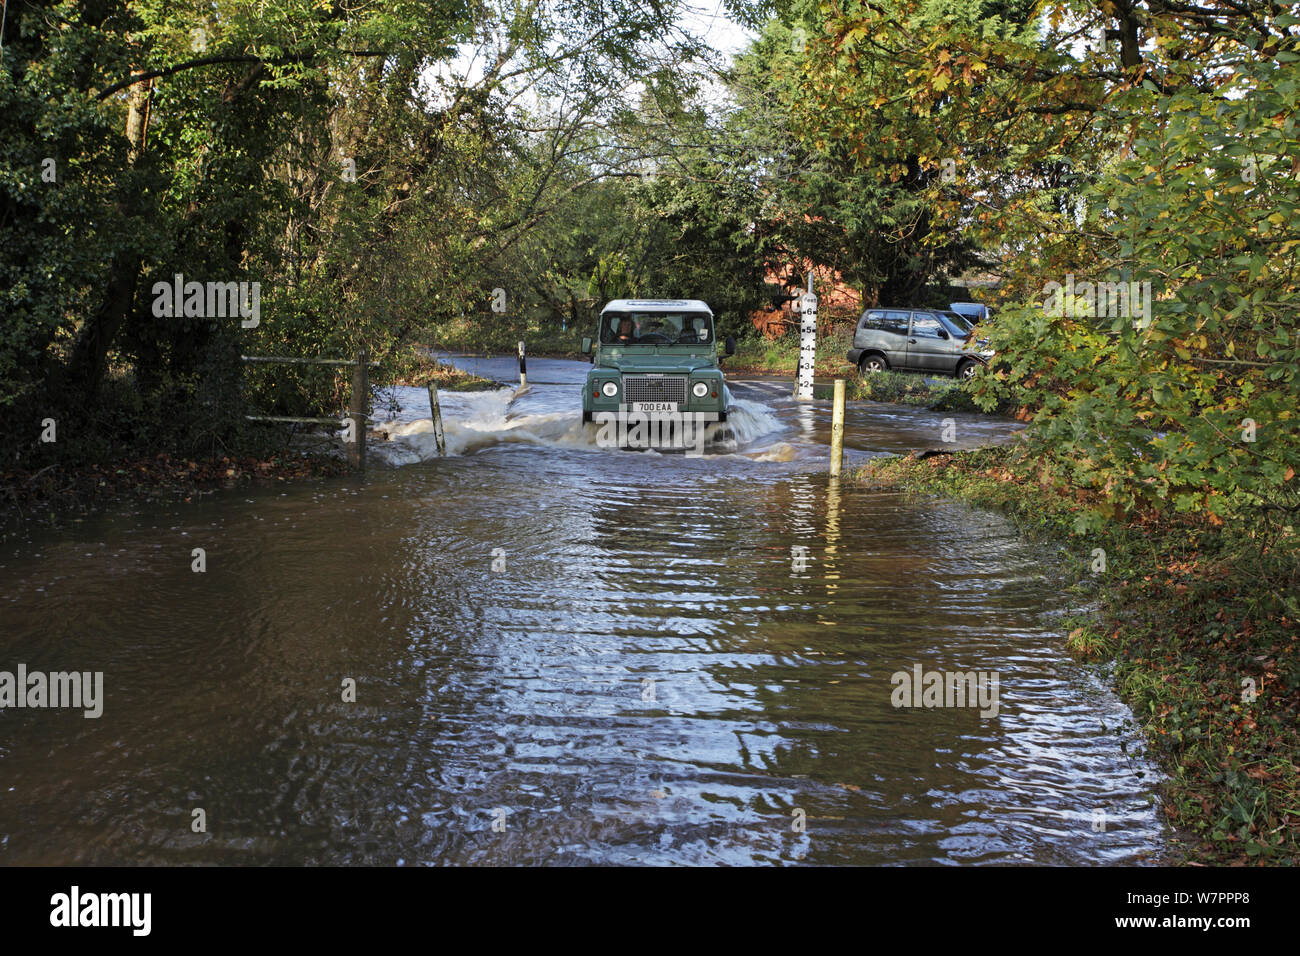 Landrover driving through the flooded ford over the Lin Brook stream, near Ringwood, Hampshire, England, UK, November 2012 Stock Photo